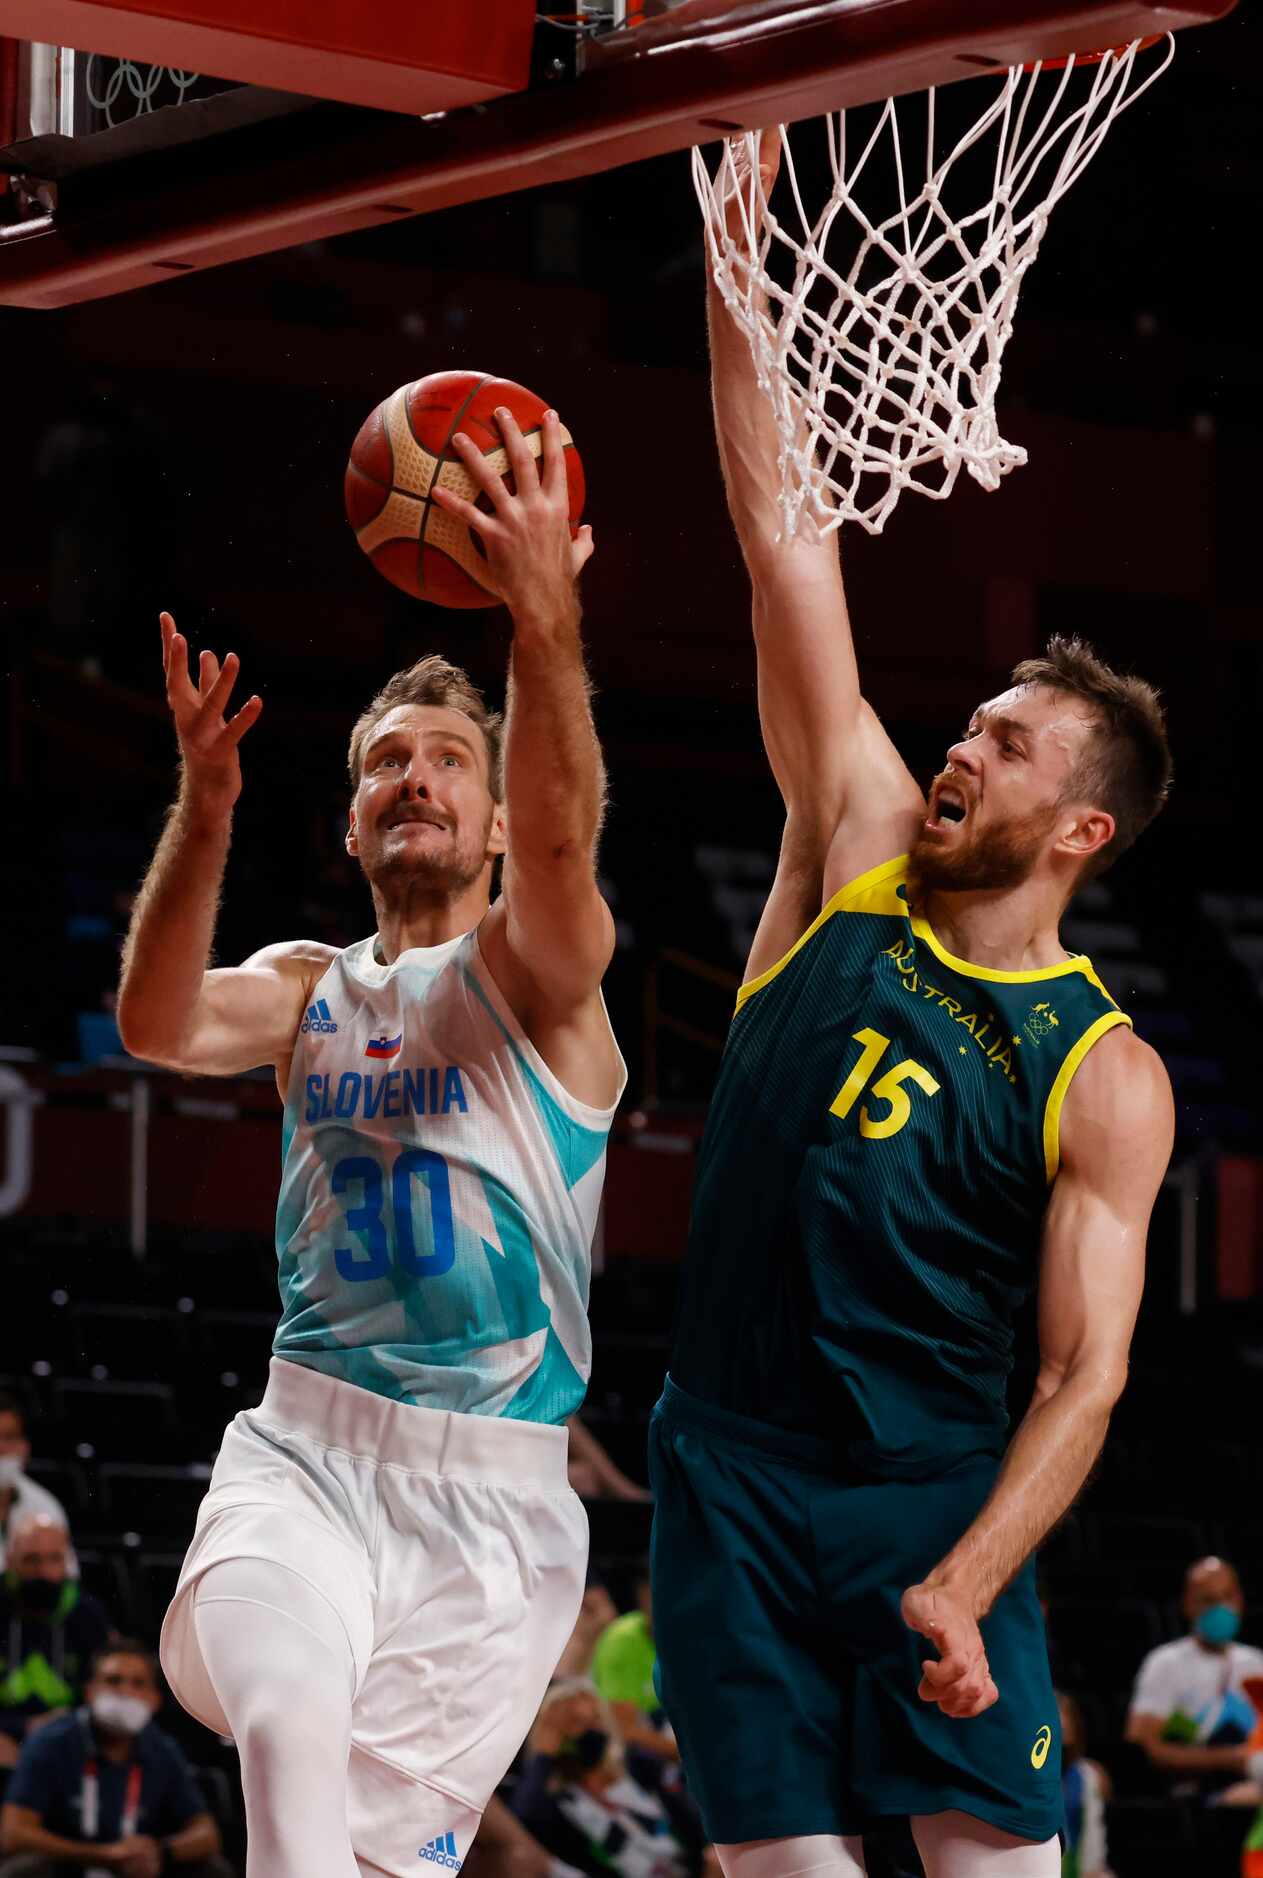 Slovenia’s Zoran Dragic (30) attempts a layup in front of Australia’s Nic Kay (15) during...